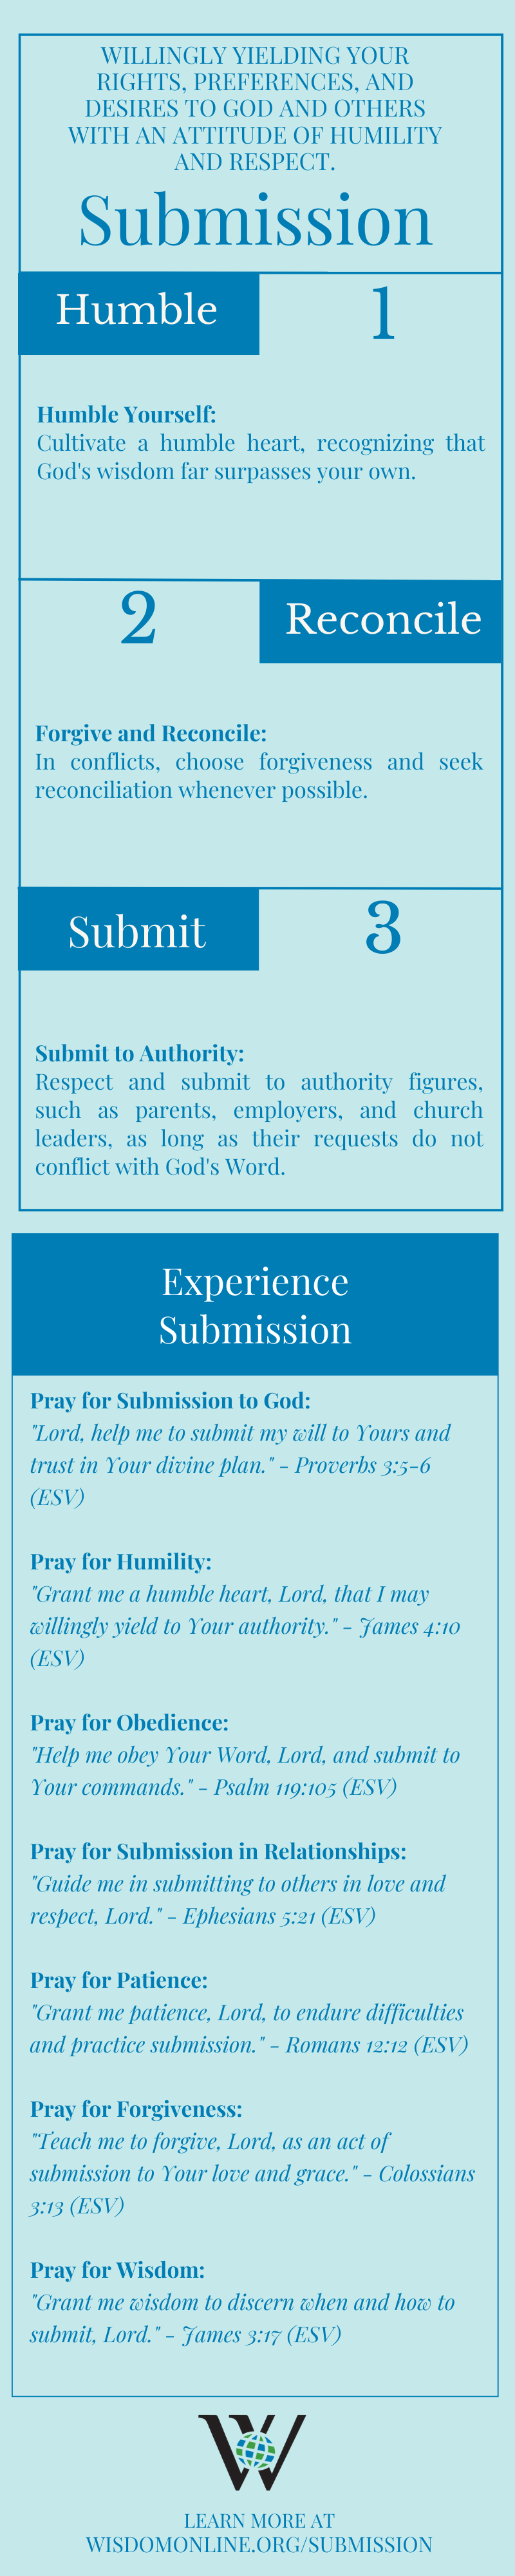 Infographic on the biblical quality of submission.